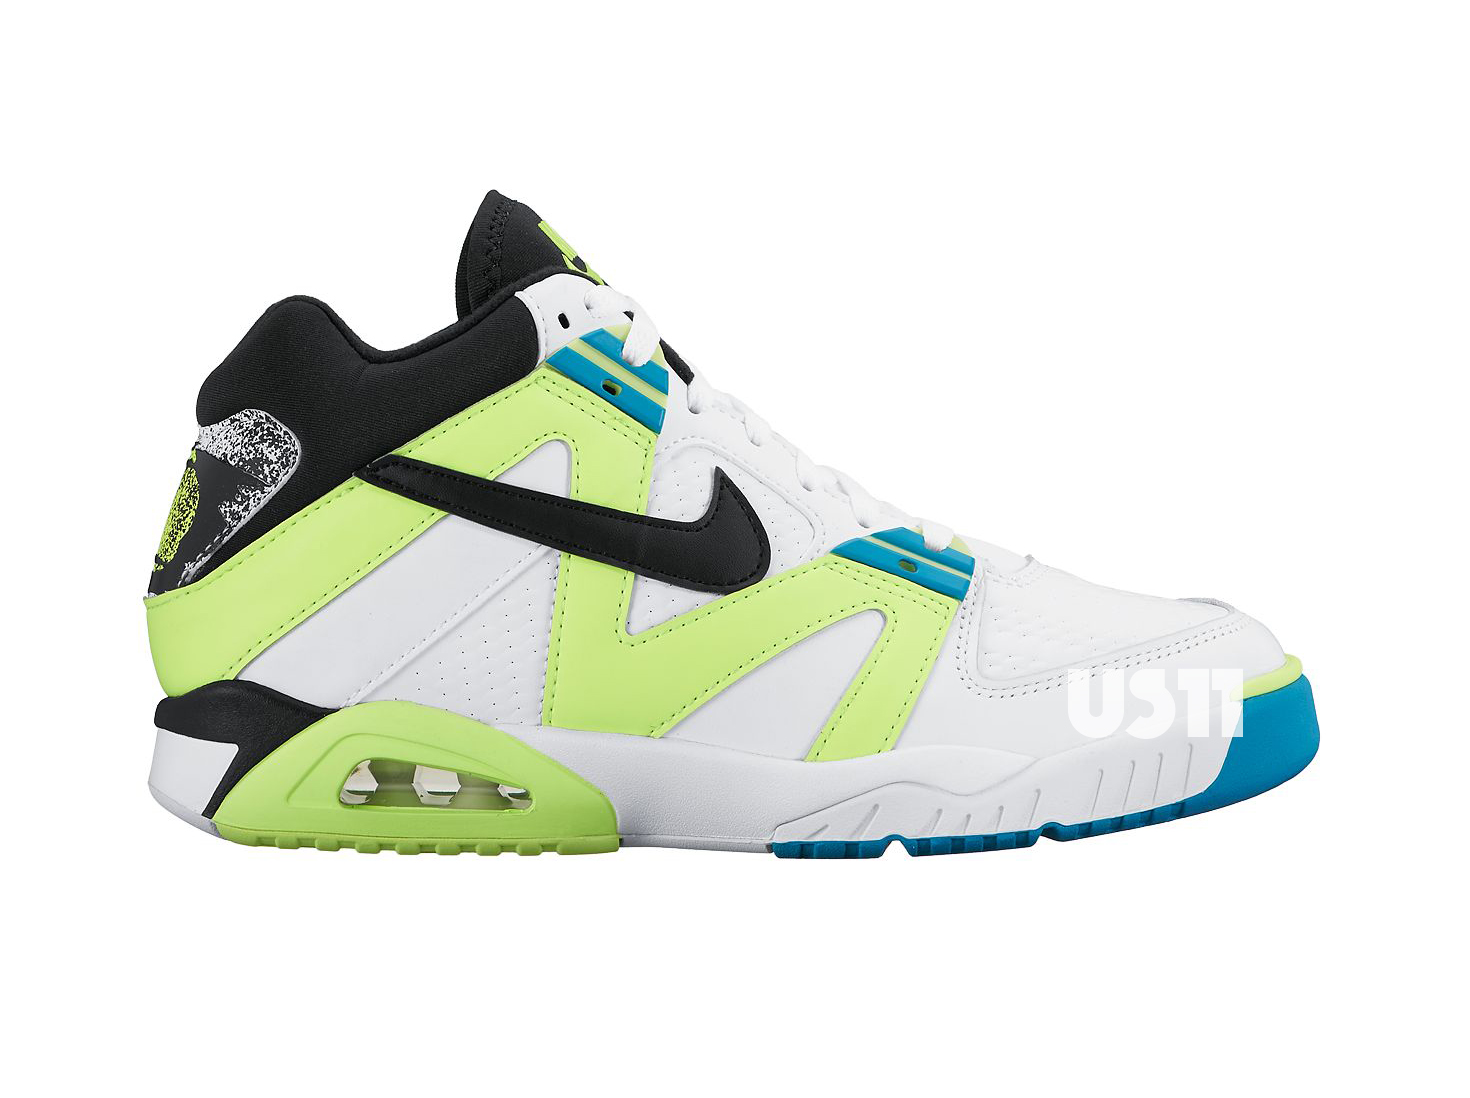 nike agassi shoes